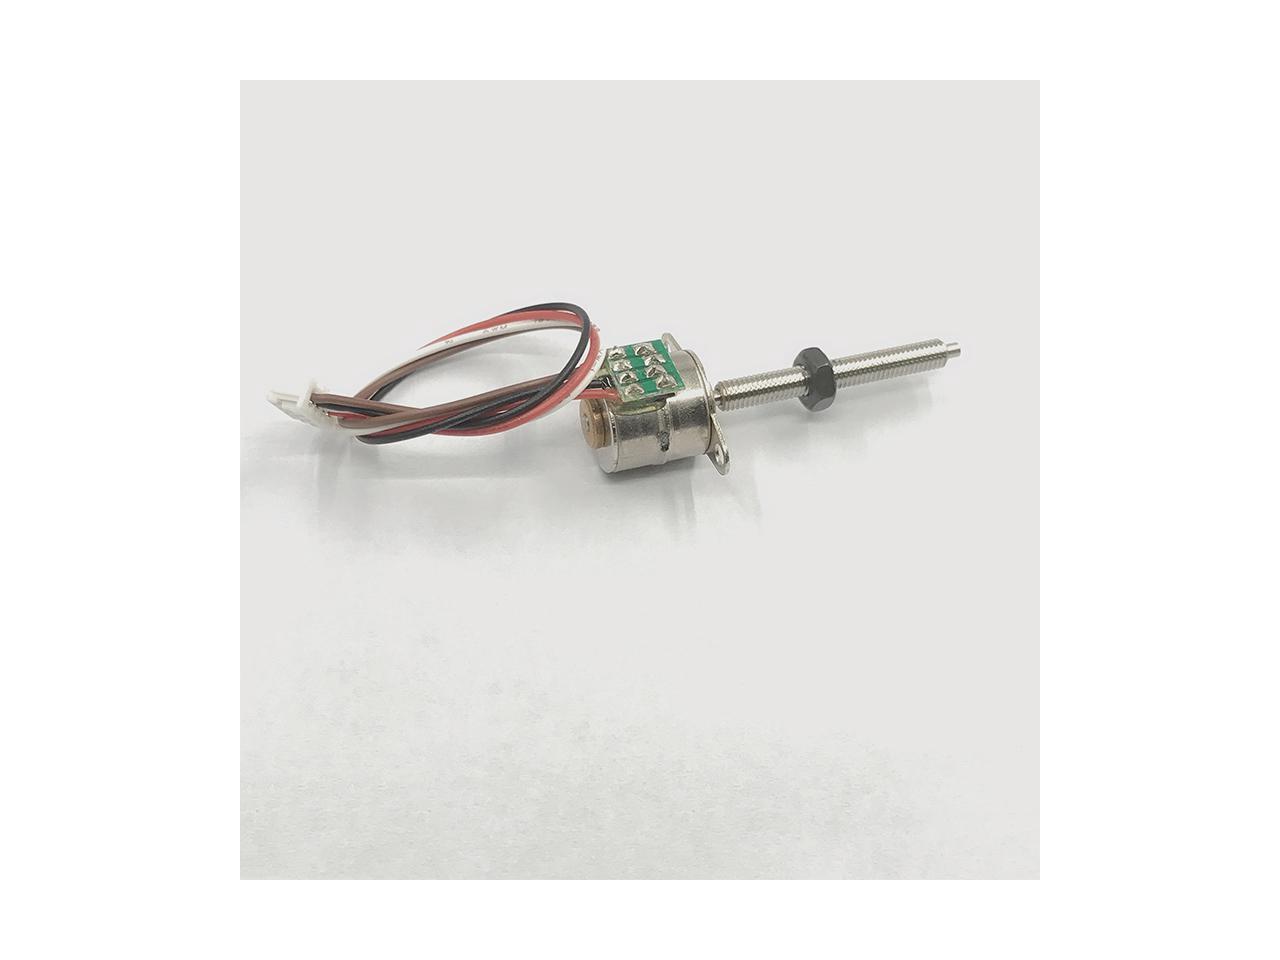 NMB DC 5V Micro 25mm 2-phase 4-wire Stepper Motor Linear Telescopic Screw Shaft 